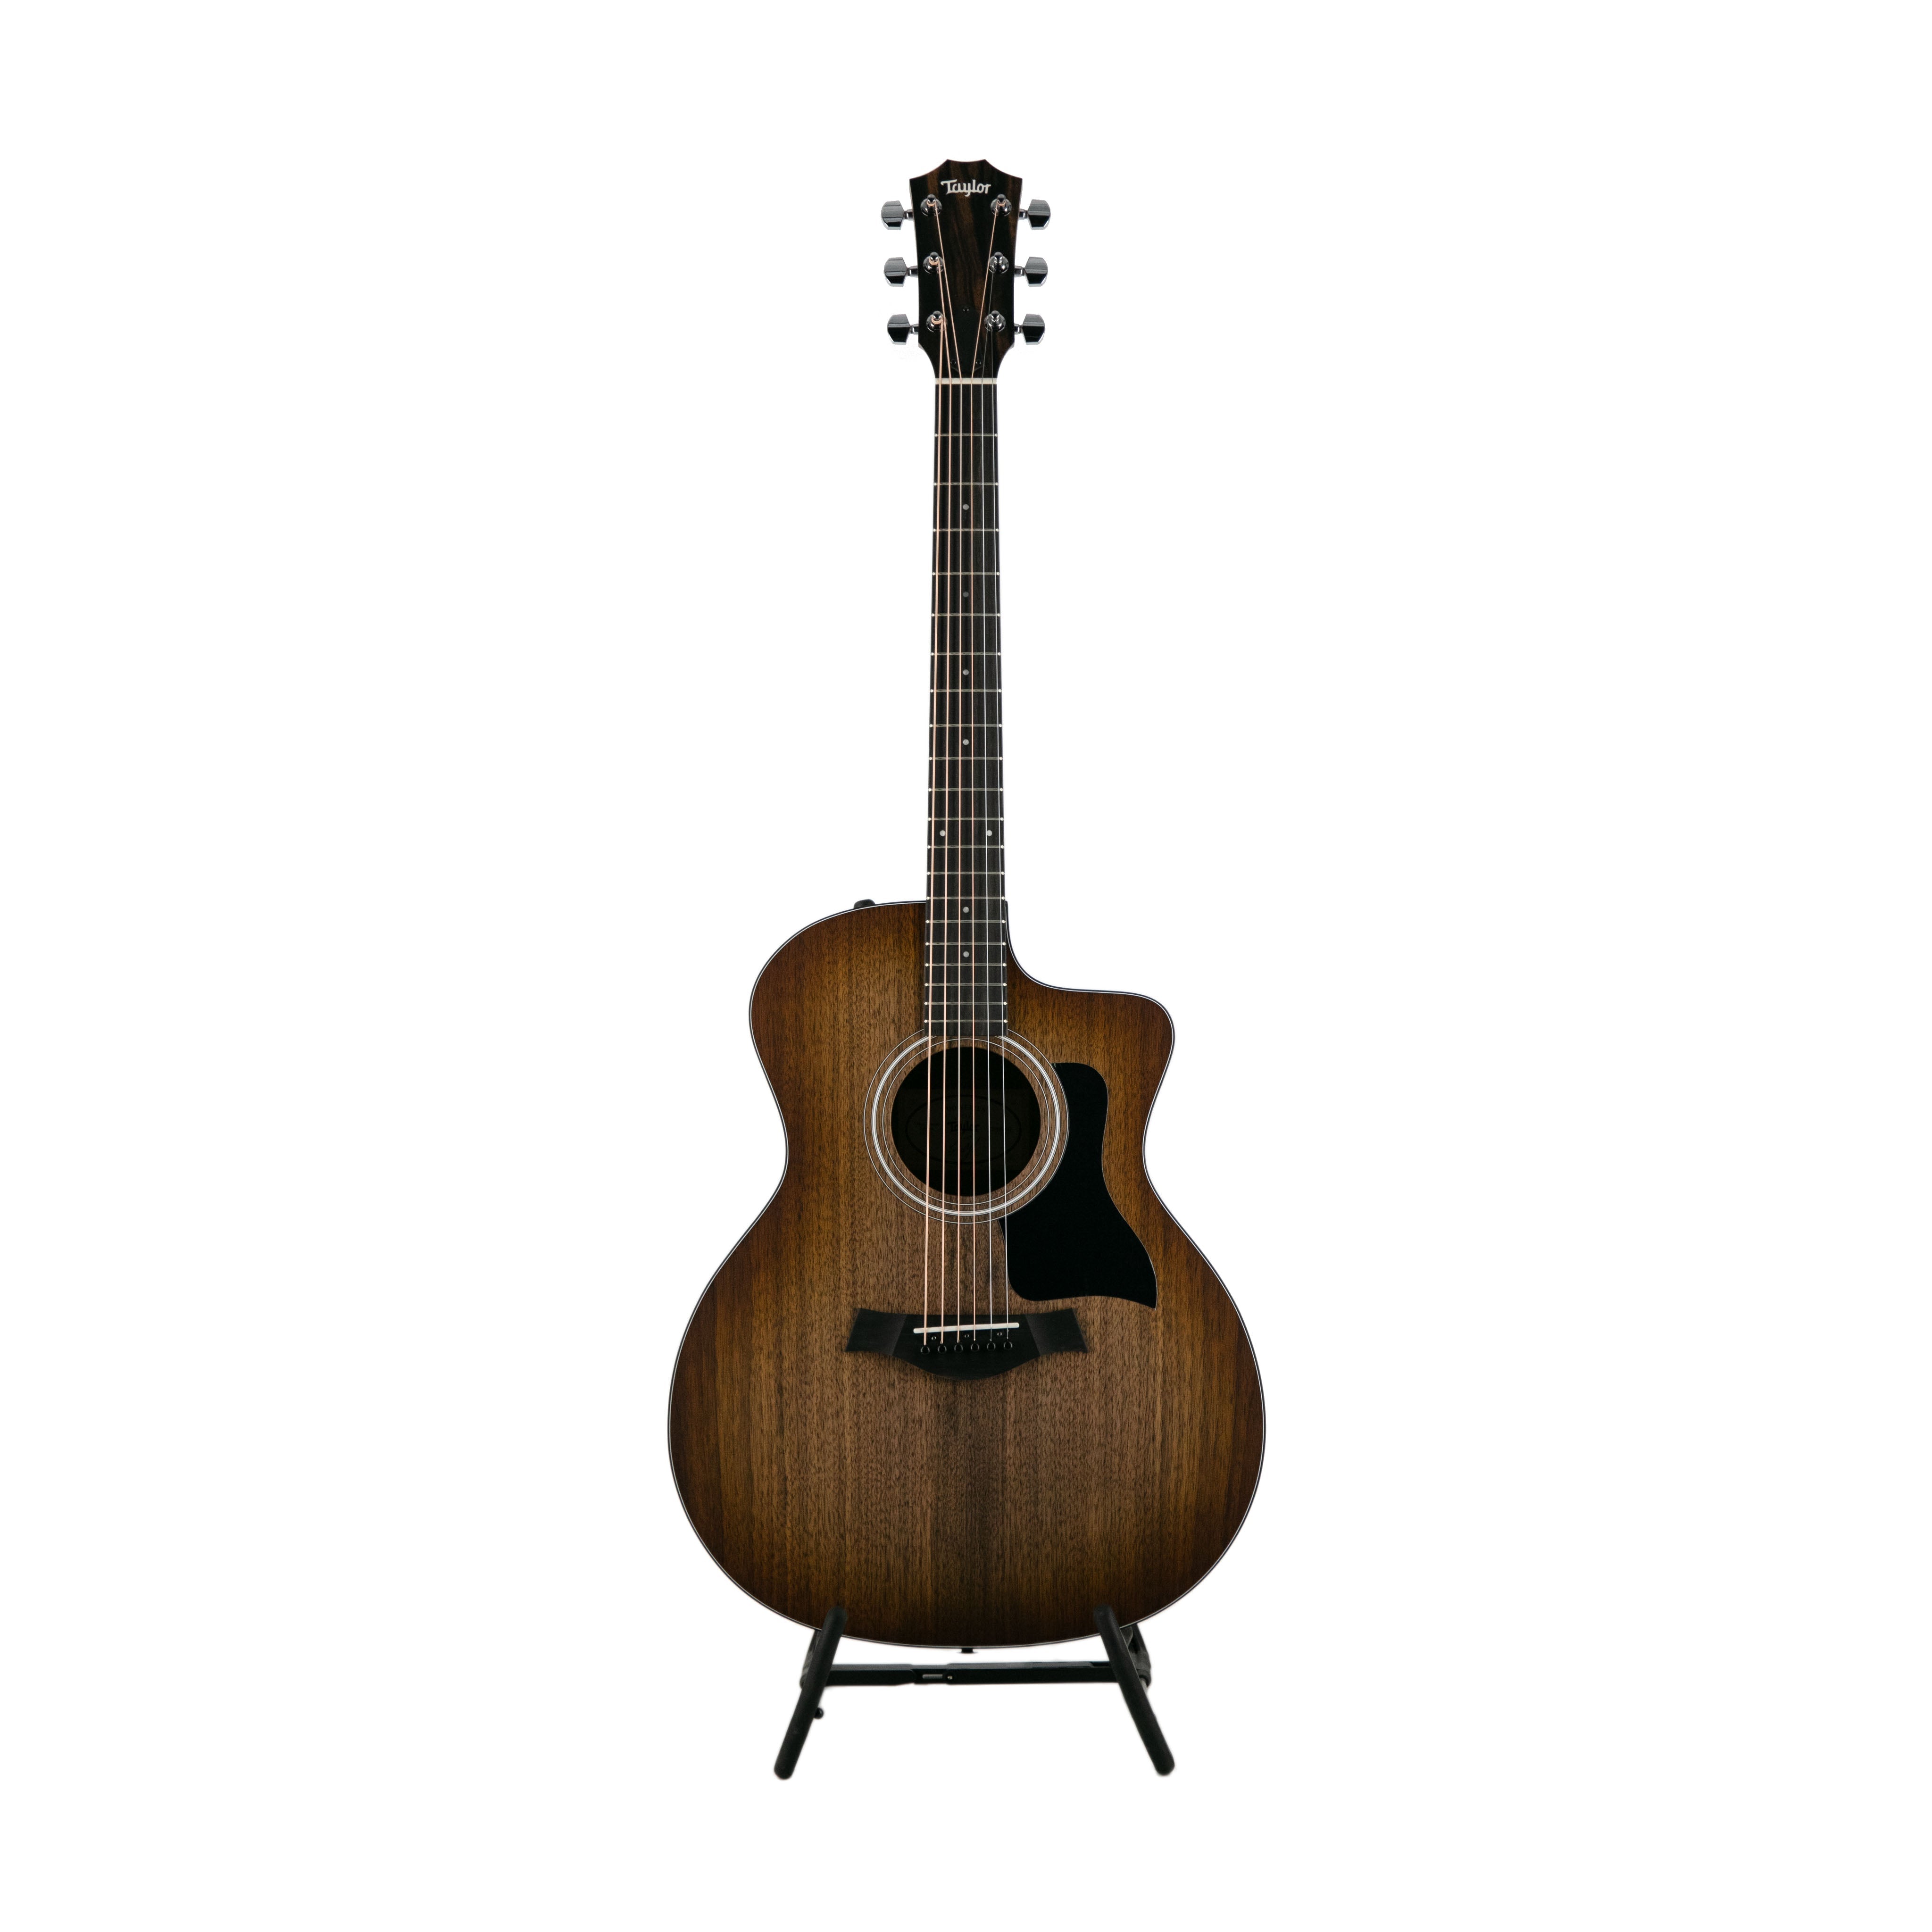 Taylor 124ce Special Edition Grand Auditorium Acoustic Guitar w/Bag, Shaded Edge Burst Top